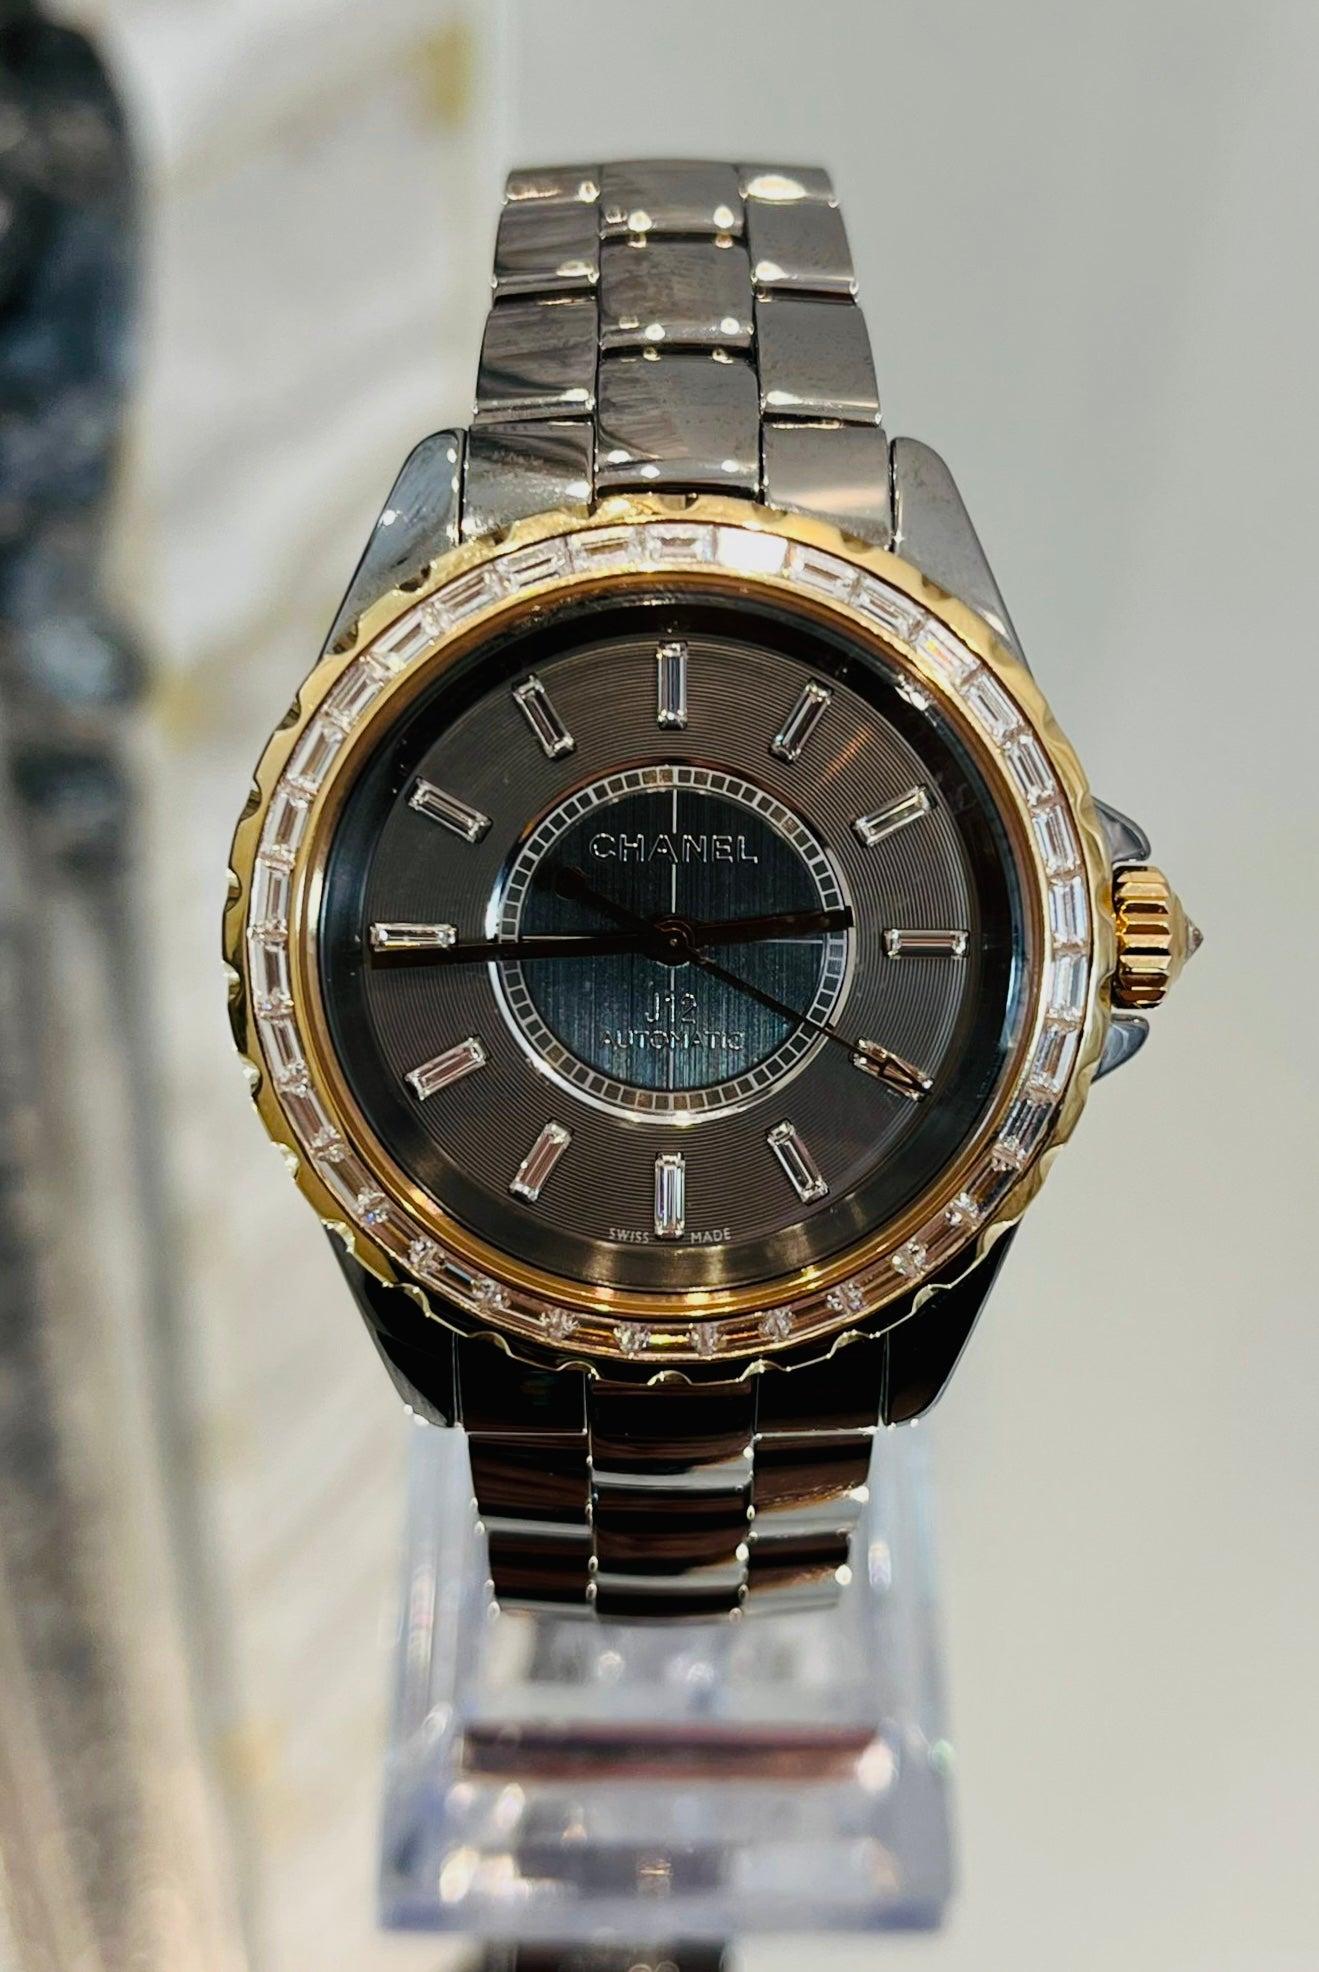 Chanel High End Jewellery Collection Baguette Diamond J12 Automatic Watch

Chromatic coloured, titanium ceramic watch with 18k Rose gold trim to the bezel and further set with 34 beautiful white baguette diamonds. Baguette diamond hour